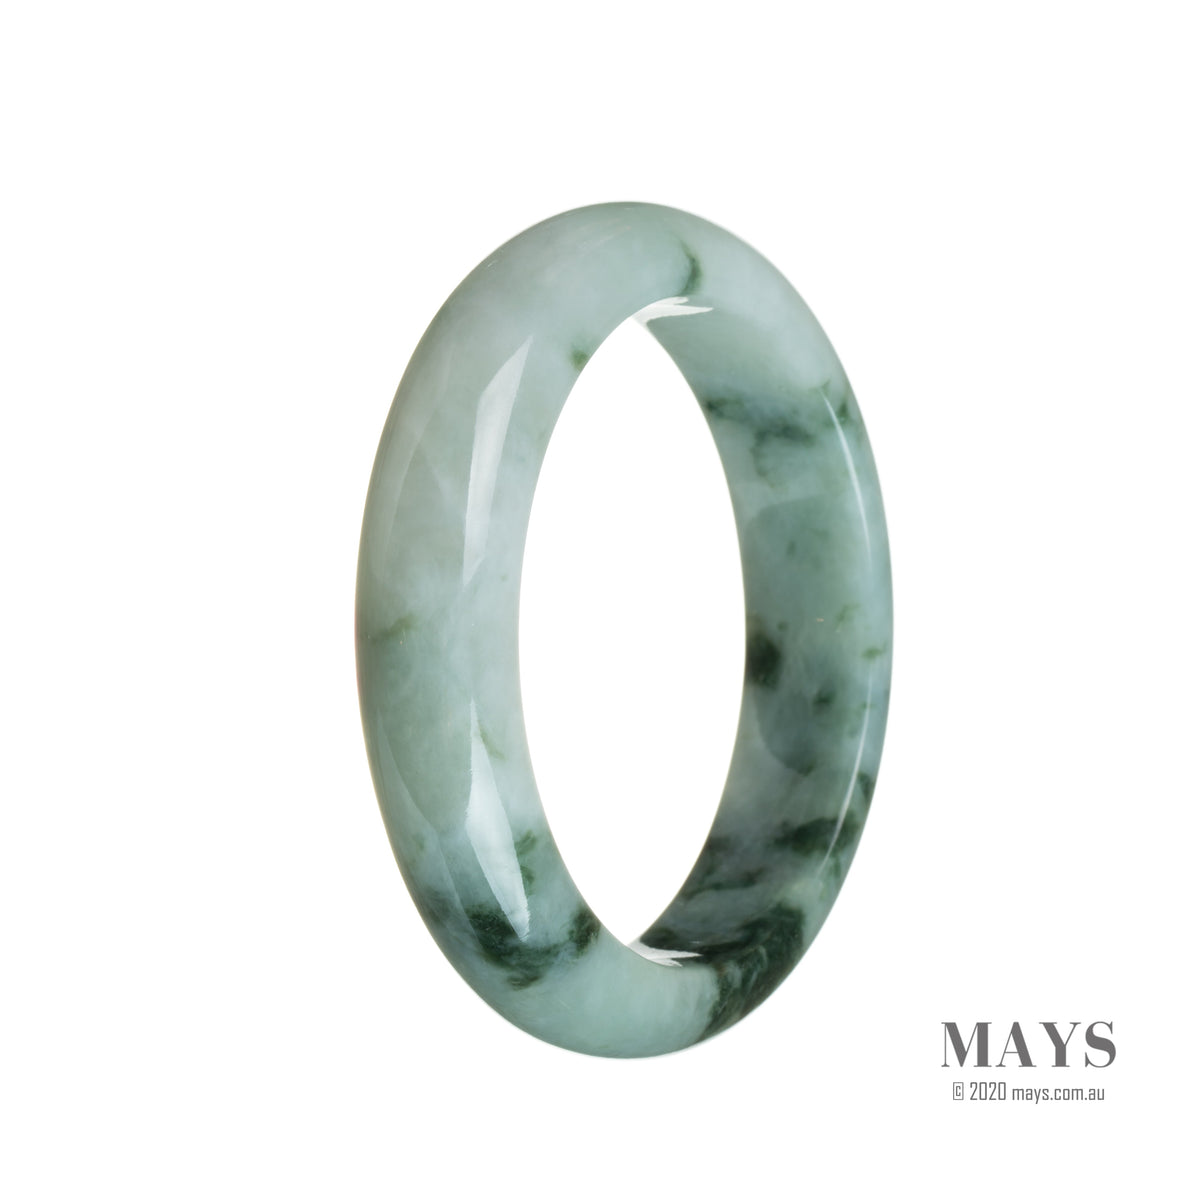 A close-up photo of a pale green jadeite bracelet with a unique pattern, featuring a semi-round shape. The jadeite appears untreated, displaying its natural beauty and authenticity. The bracelet has a diameter of 55mm and is crafted by MAYS.